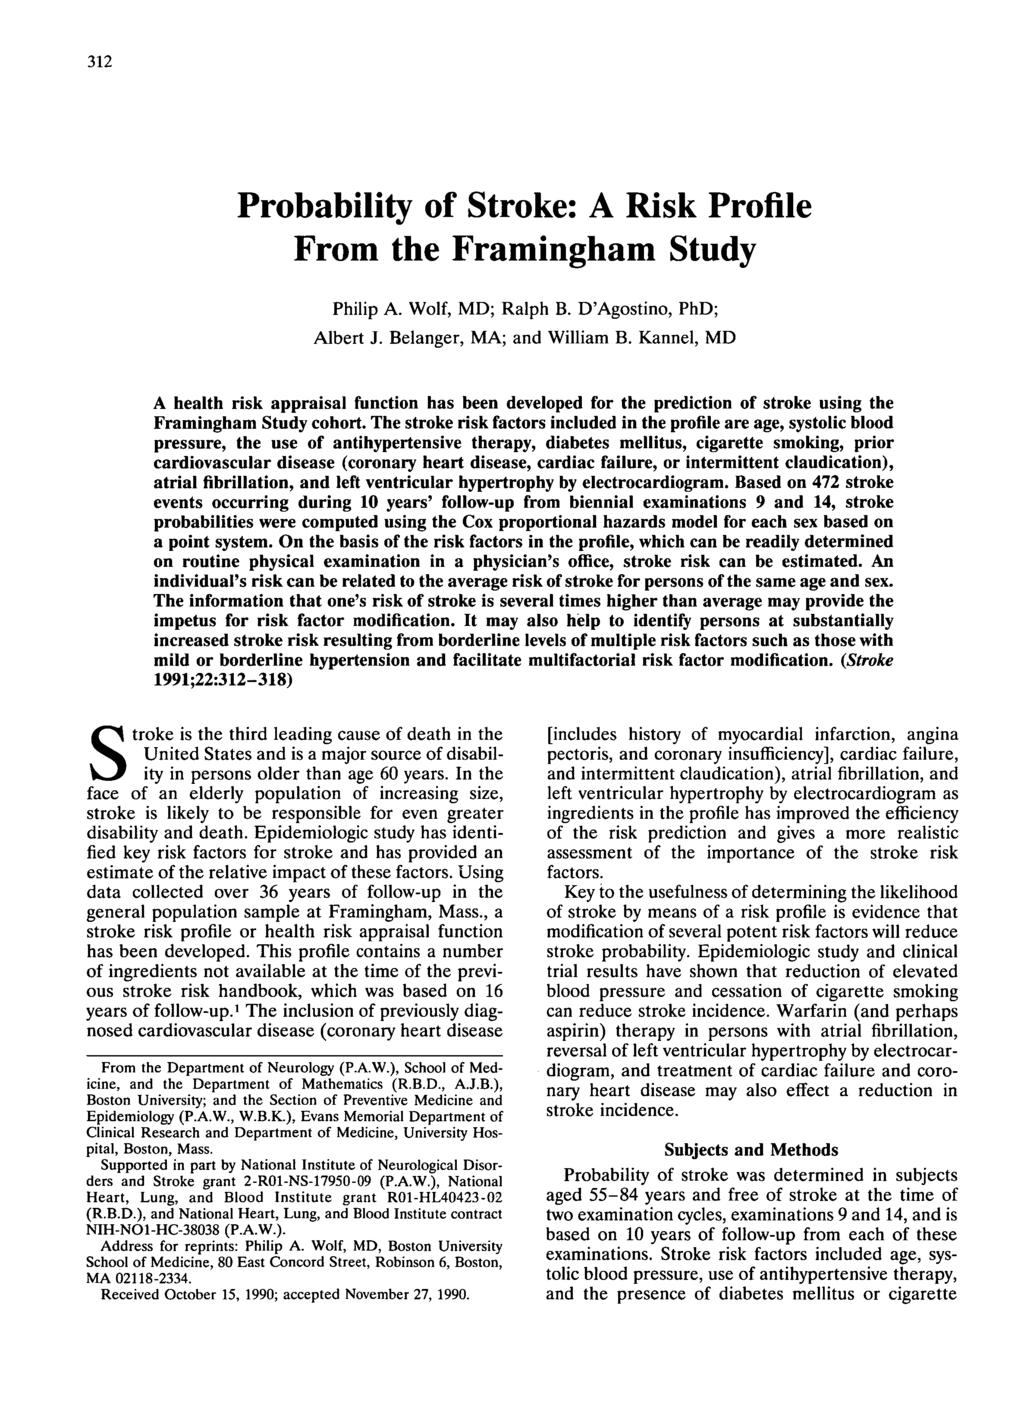 Probability of Stroke: A Risk Profile From the Framingham Study Philip A. Wolf, MD; Ralph B. D'Agostino, PhD; Albert J. Belanger, MA; and William B.